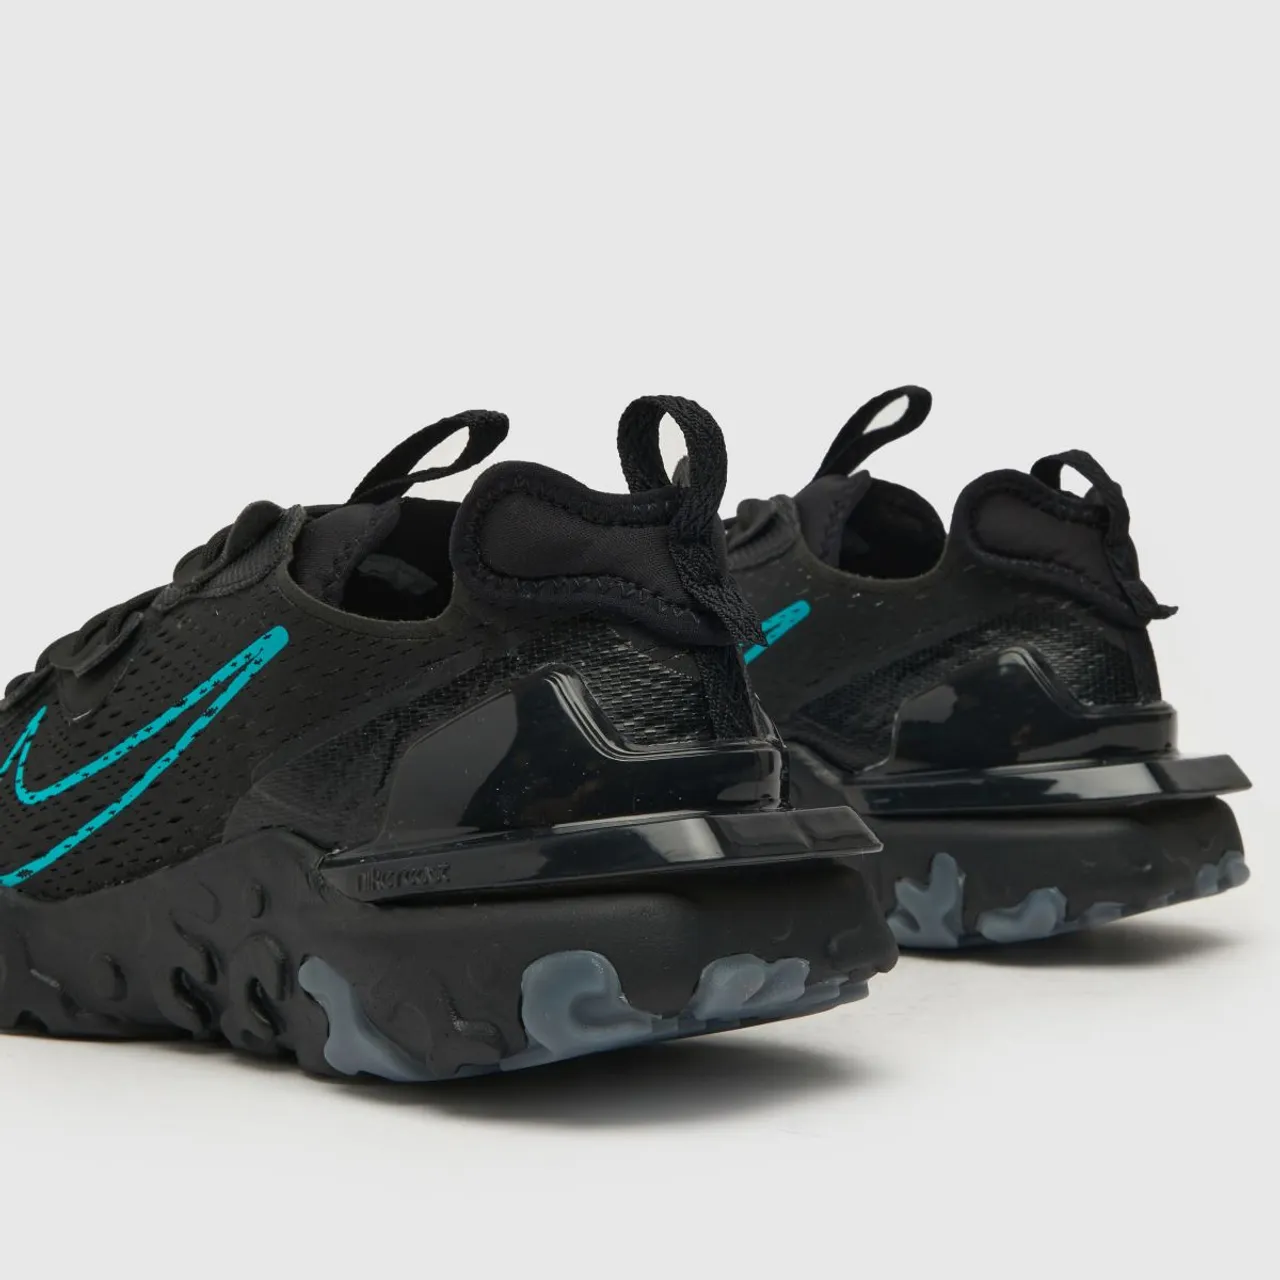 Nike React Vision Trainers In Black And Blue